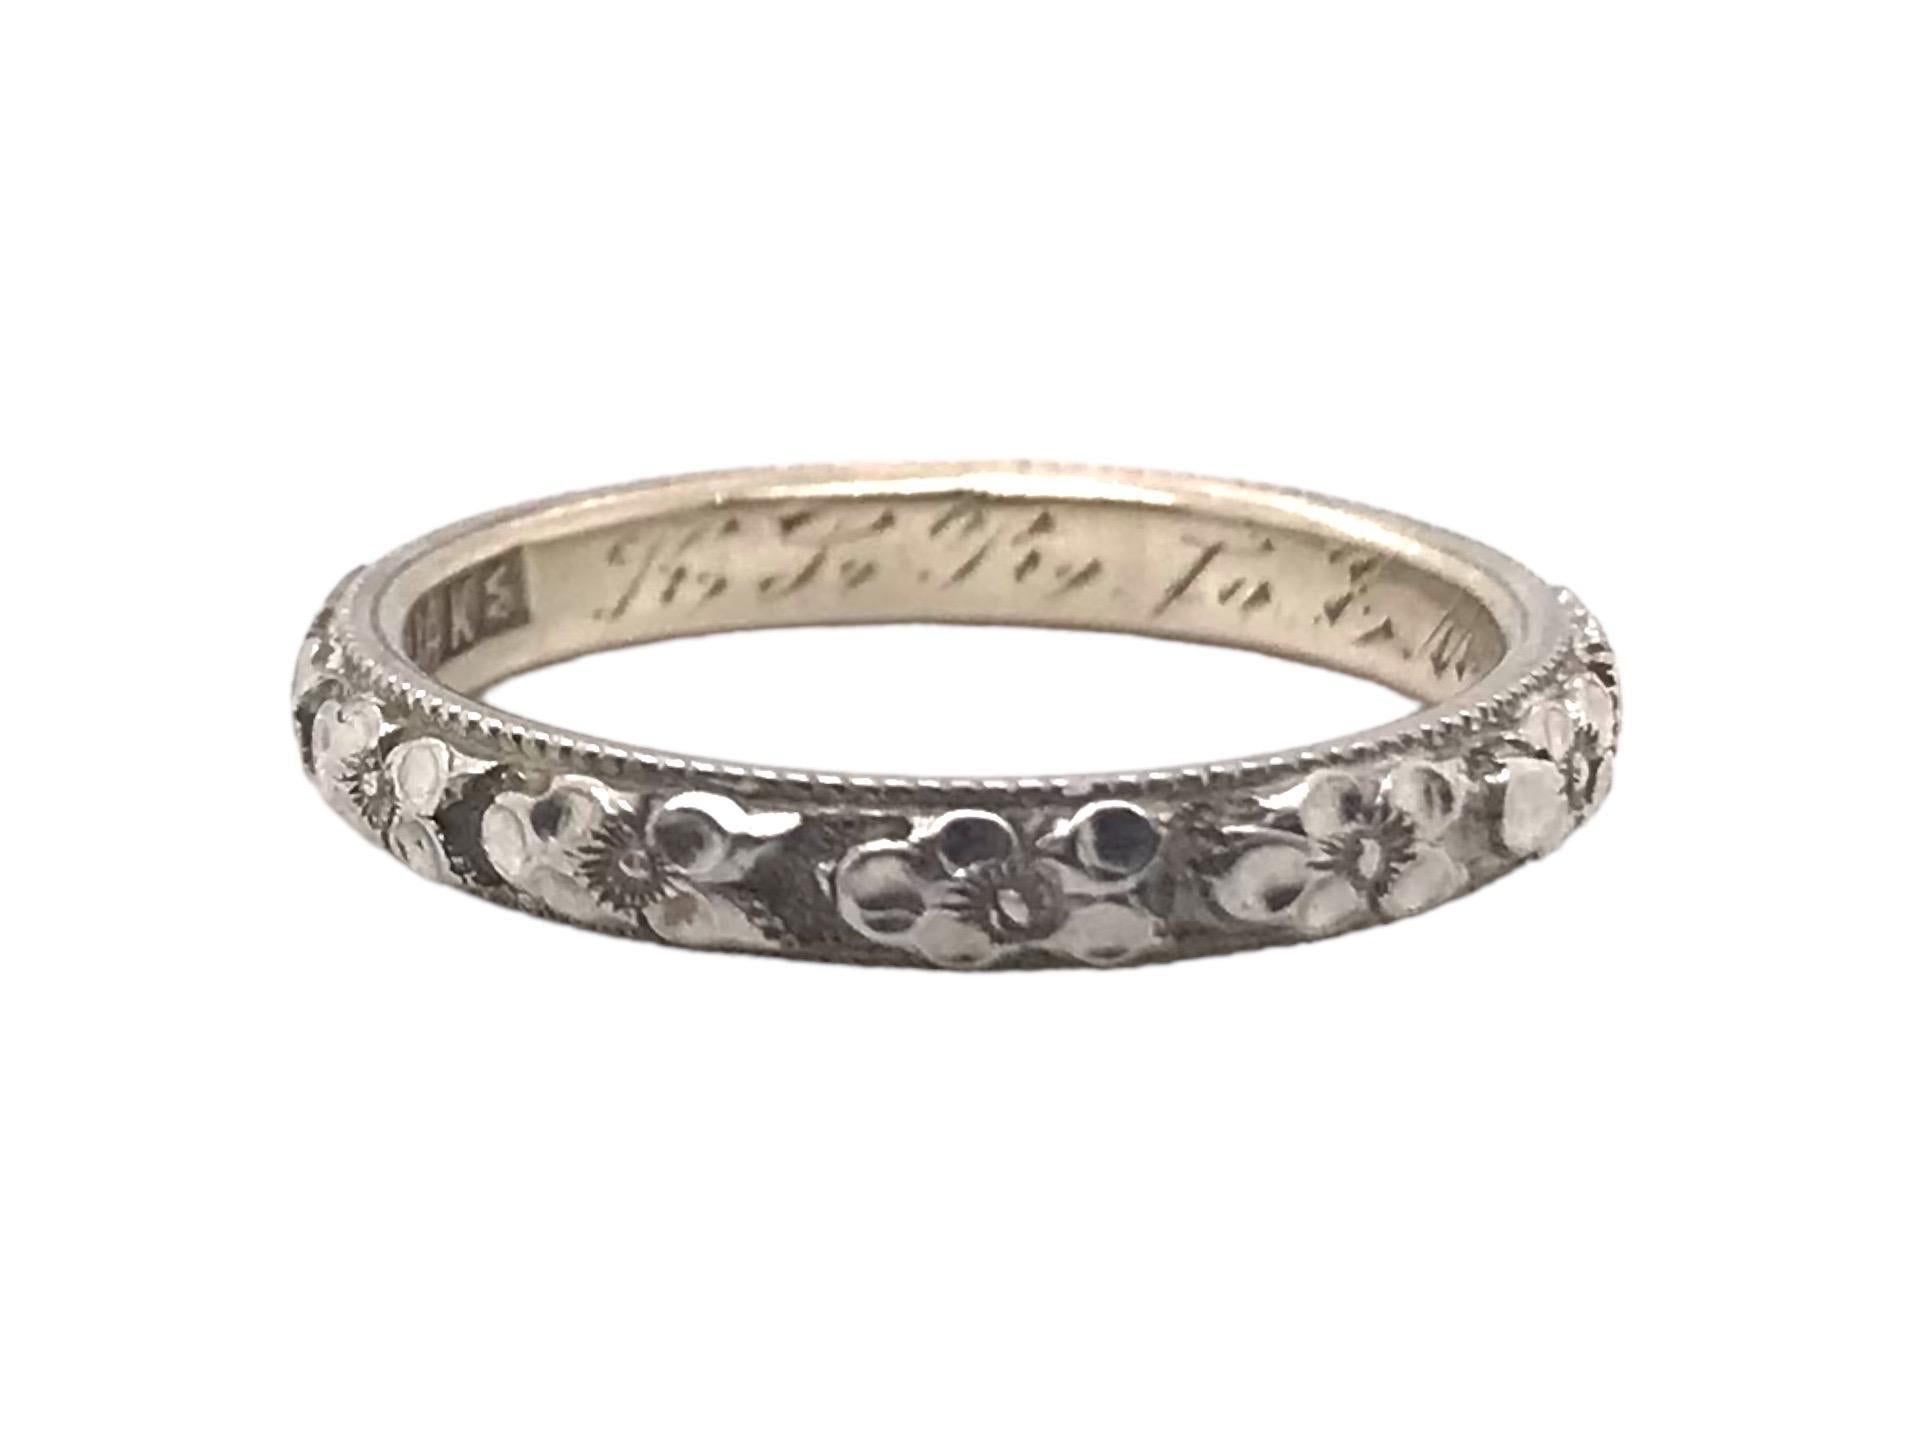 Vintage Engraved 14K White Gold Wedding Band Size 5.5 In Good Condition For Sale In Montgomery, AL